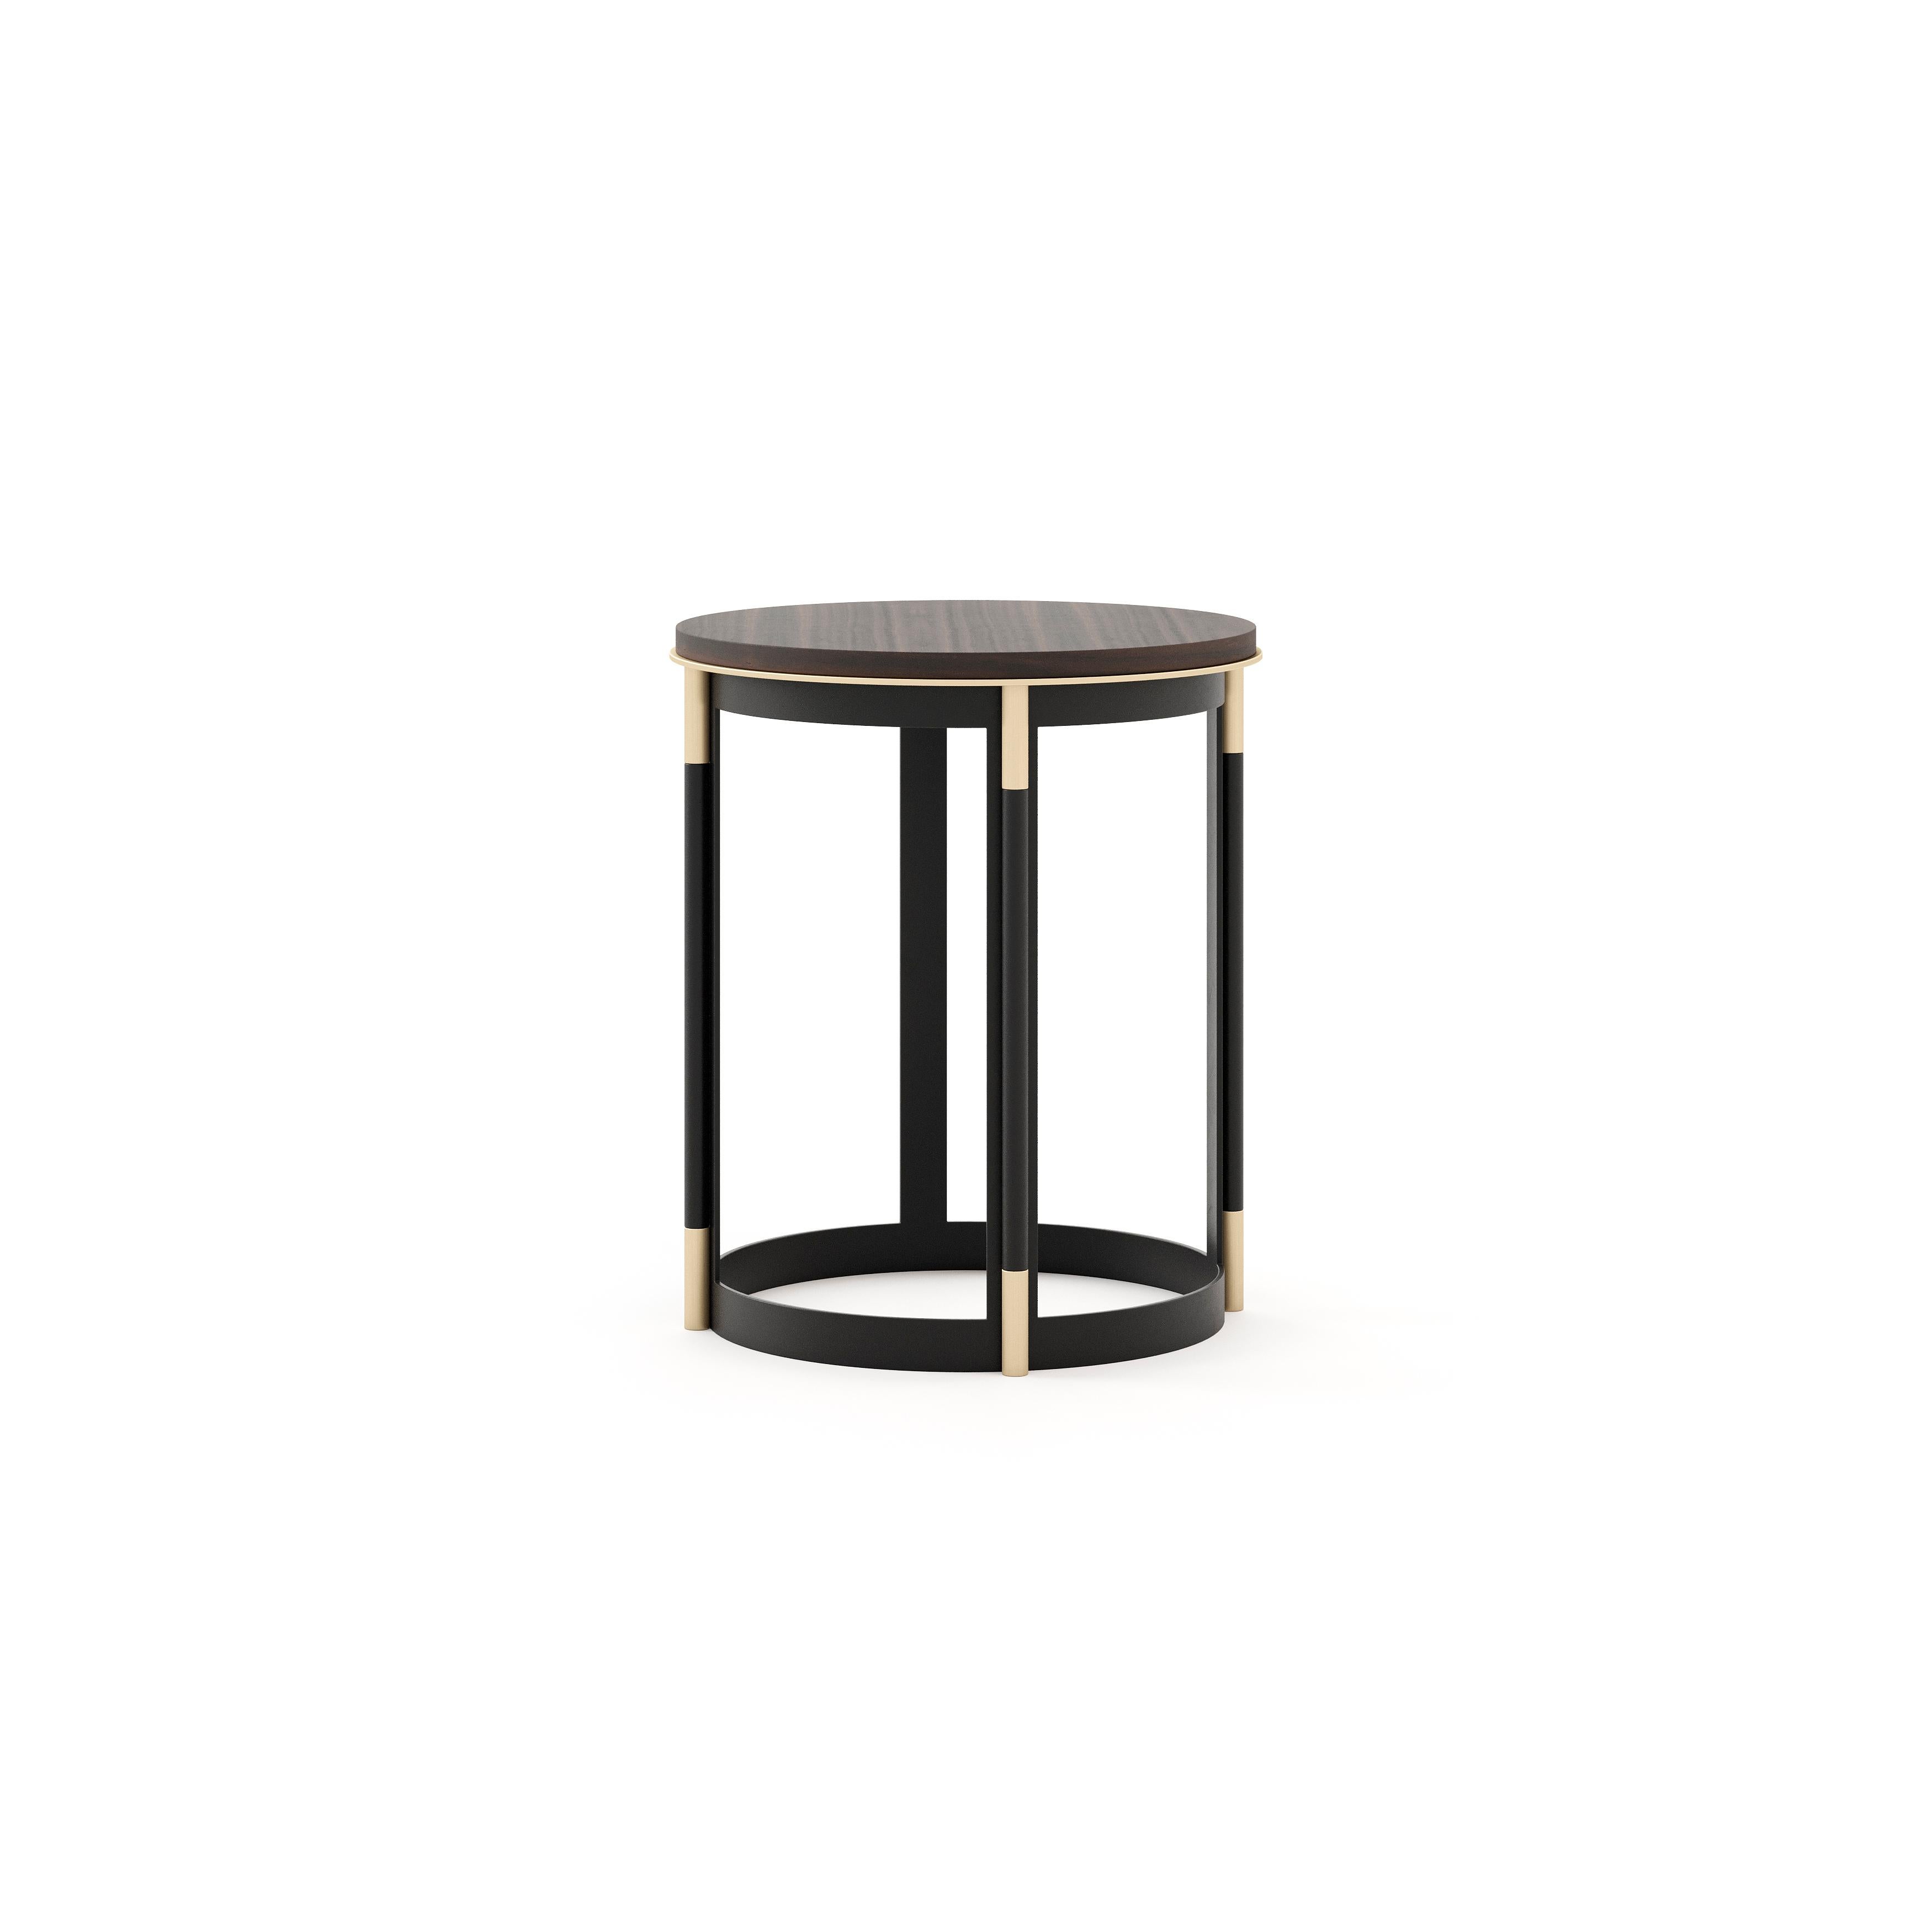 Lyssa side table's strong geometric design is supported by a wrought iron structure with metallic details. An iconic side table for elegant living rooms.

* Available in different finishes.
** Other custom sizes upon request.